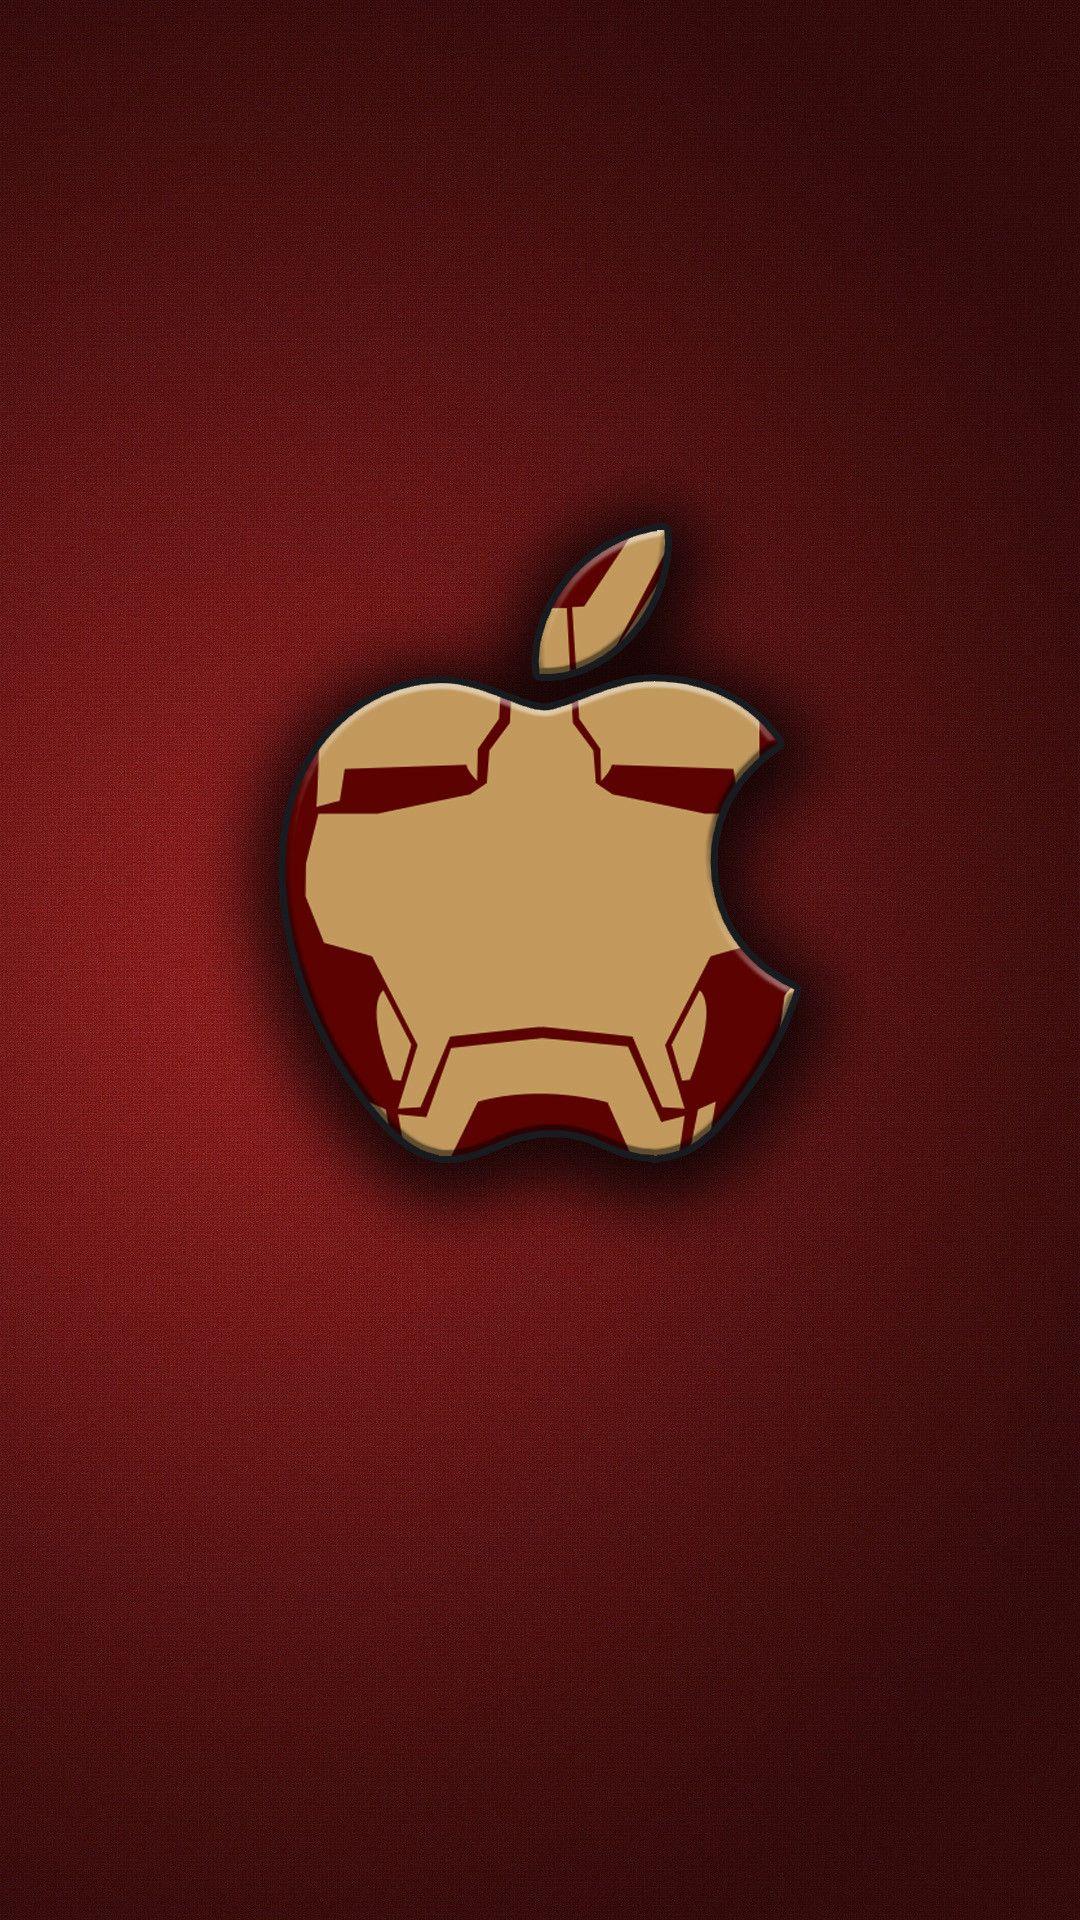 Marvel Logo Iphone Wallpapers Top Free Marvel Logo Iphone Backgrounds Wallpaperaccess